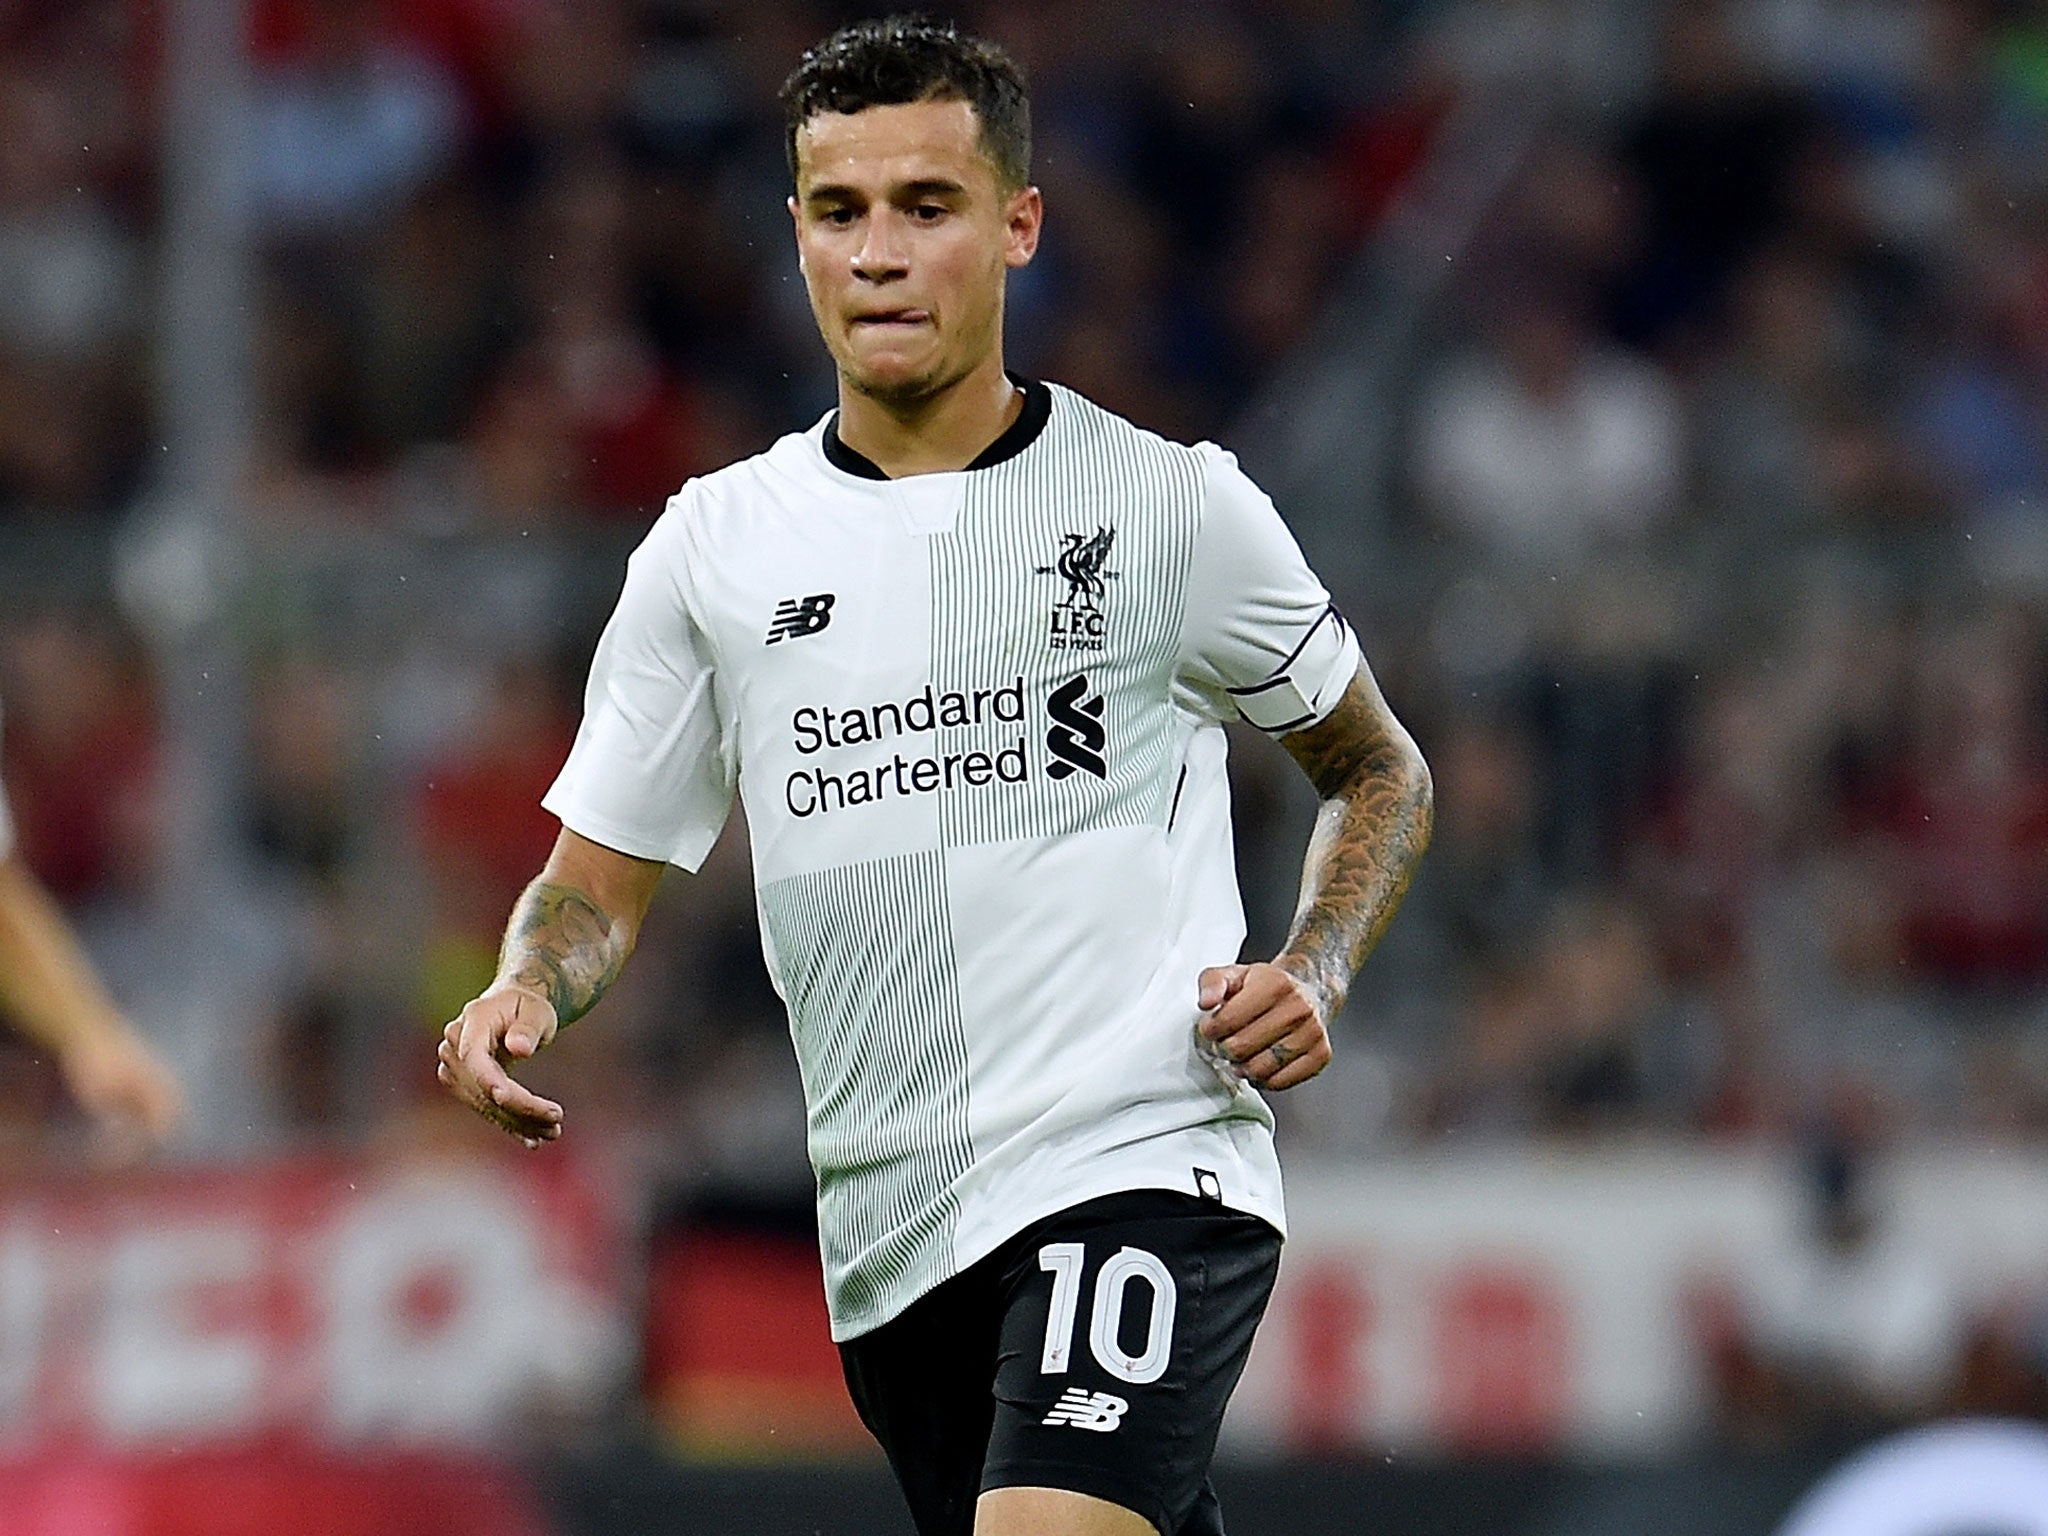 Coutinho remains Barcelona's top transfer target to replace Neymar